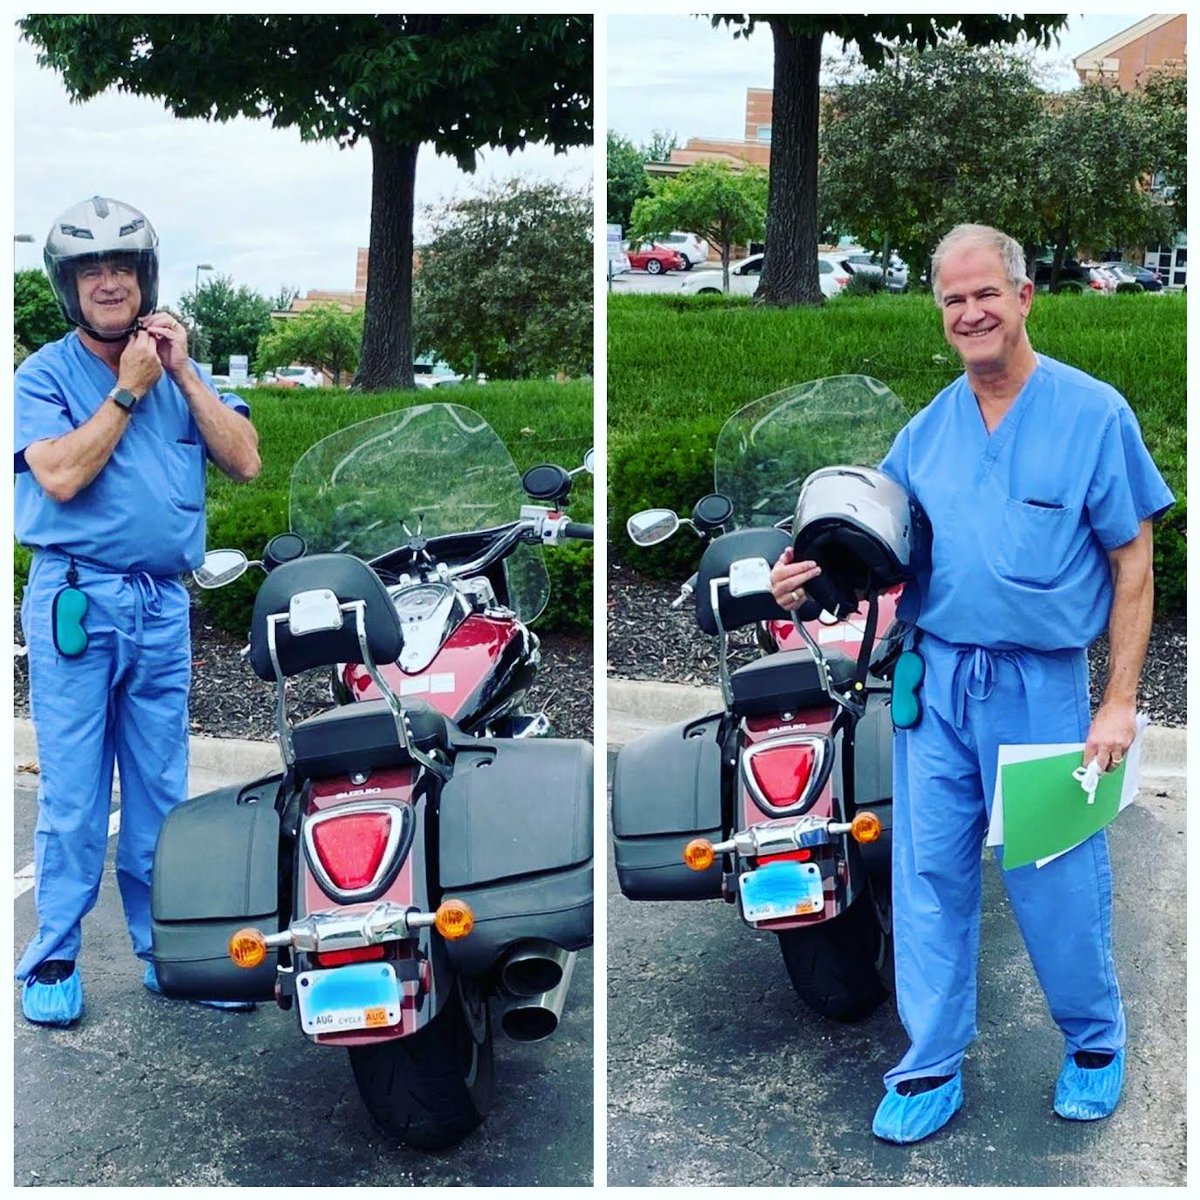 There's something to be said for my short motorcycle ride to the clinic. I believe the term is 'wind therapy.'

On nice days, it's great to be able to hit the open road before a busy day of surgery or seeing patients.

What do you do to enjoy the great outdoors?

#cosmeticsurgeon